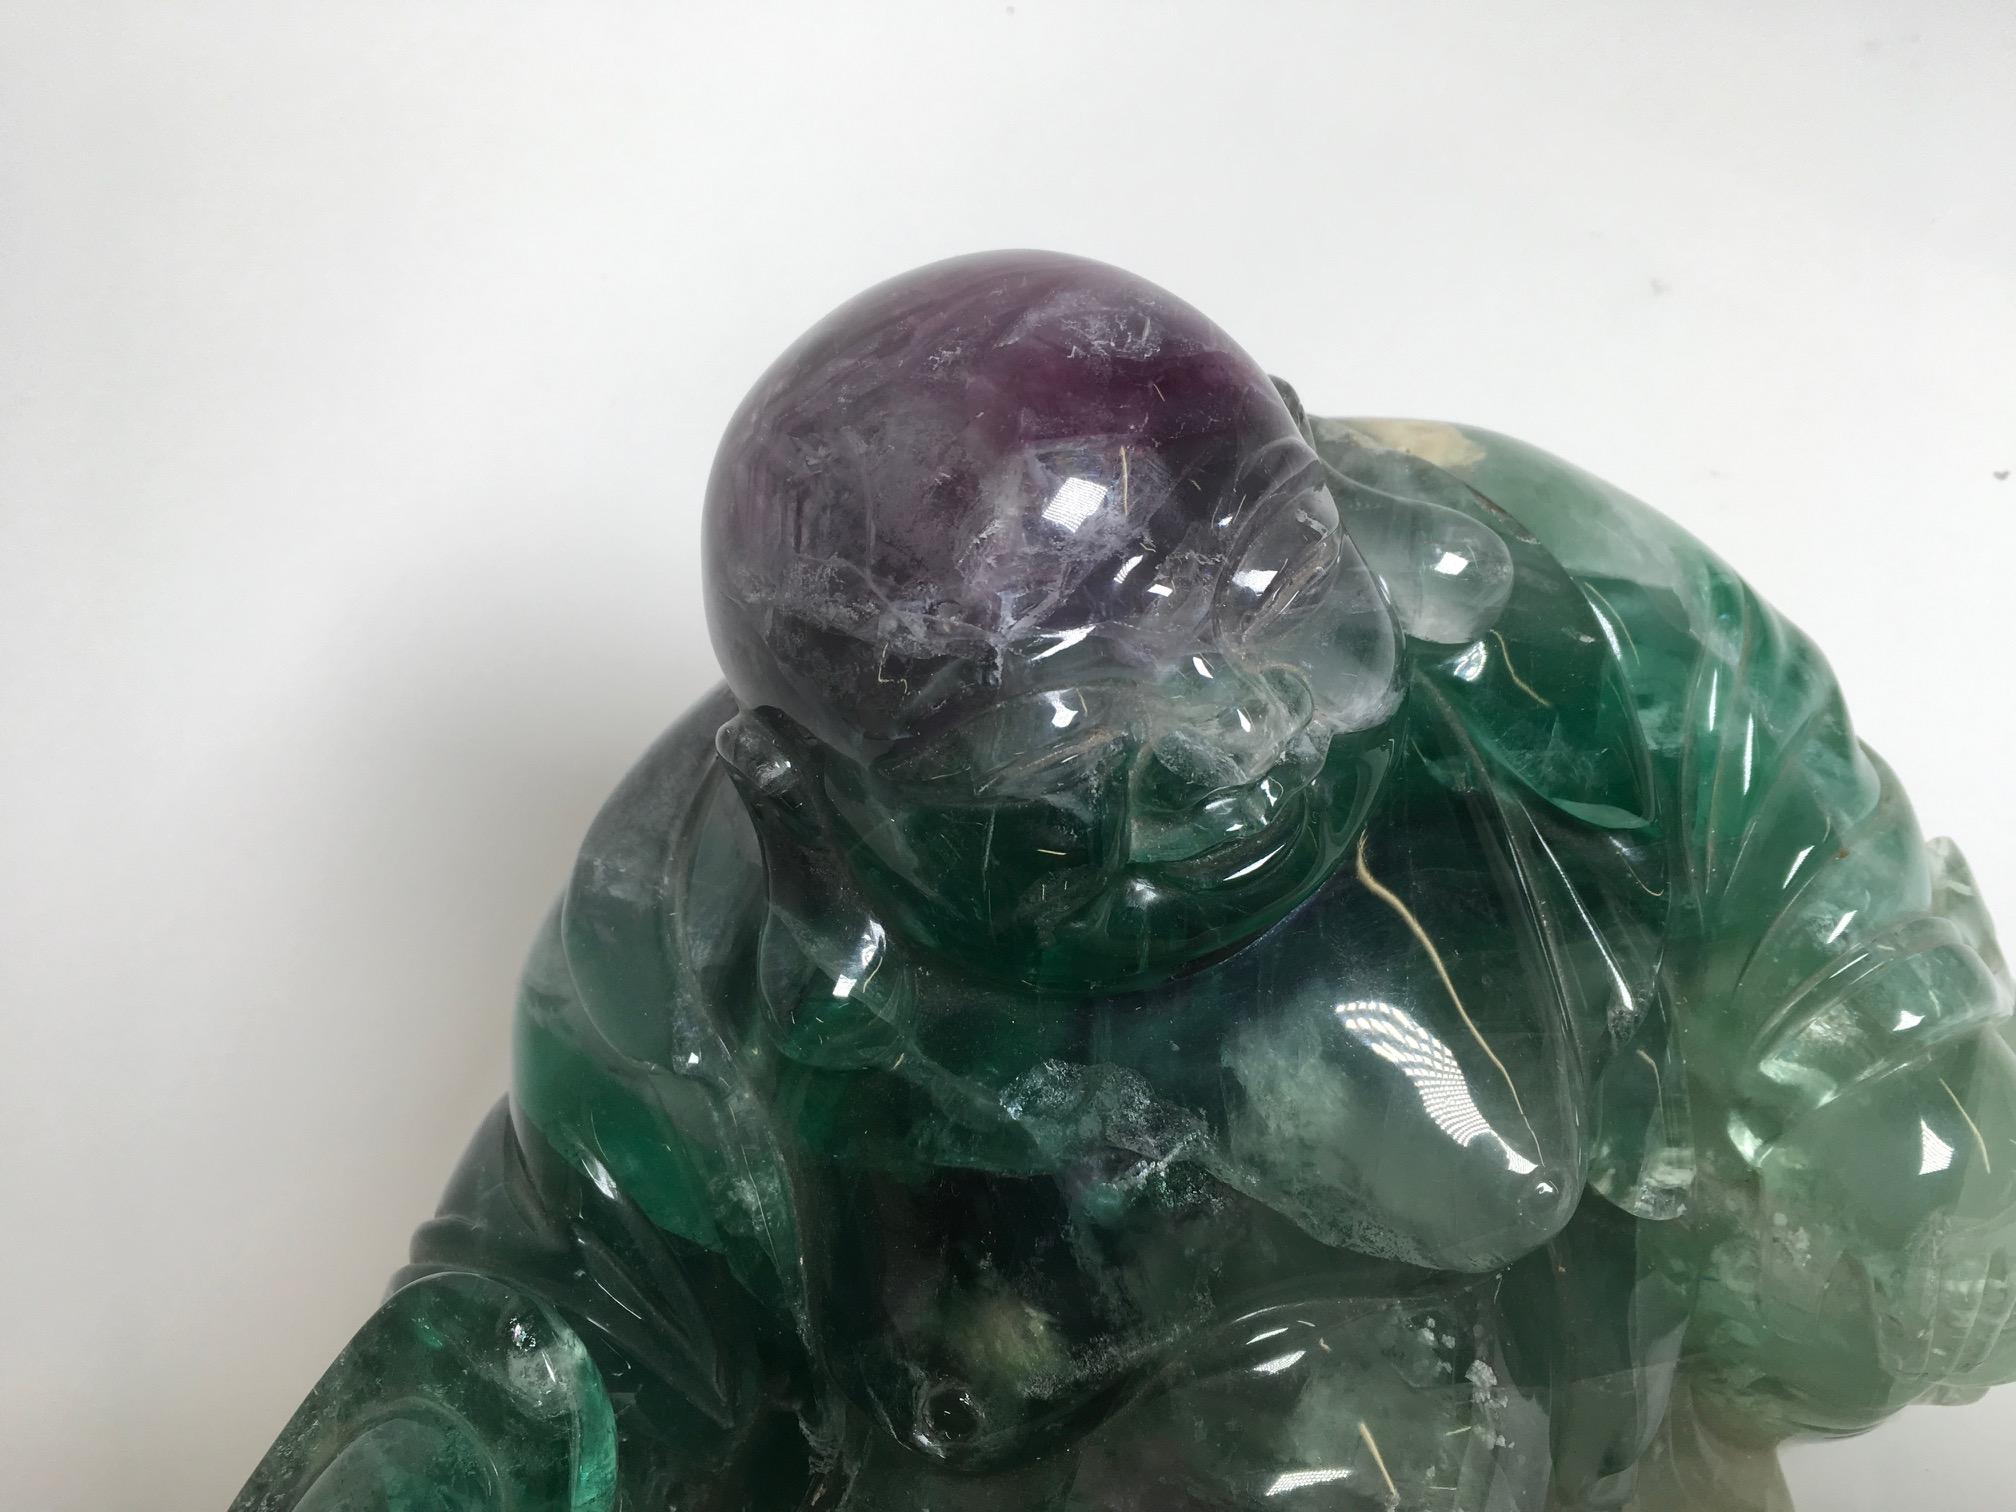 A beautiful sculpture in stone of Fluorite produced in China. Fluorite is a mineral composed of calcium fluoride. Fluorite stimulates creativity and imagination.
Italian private collection.